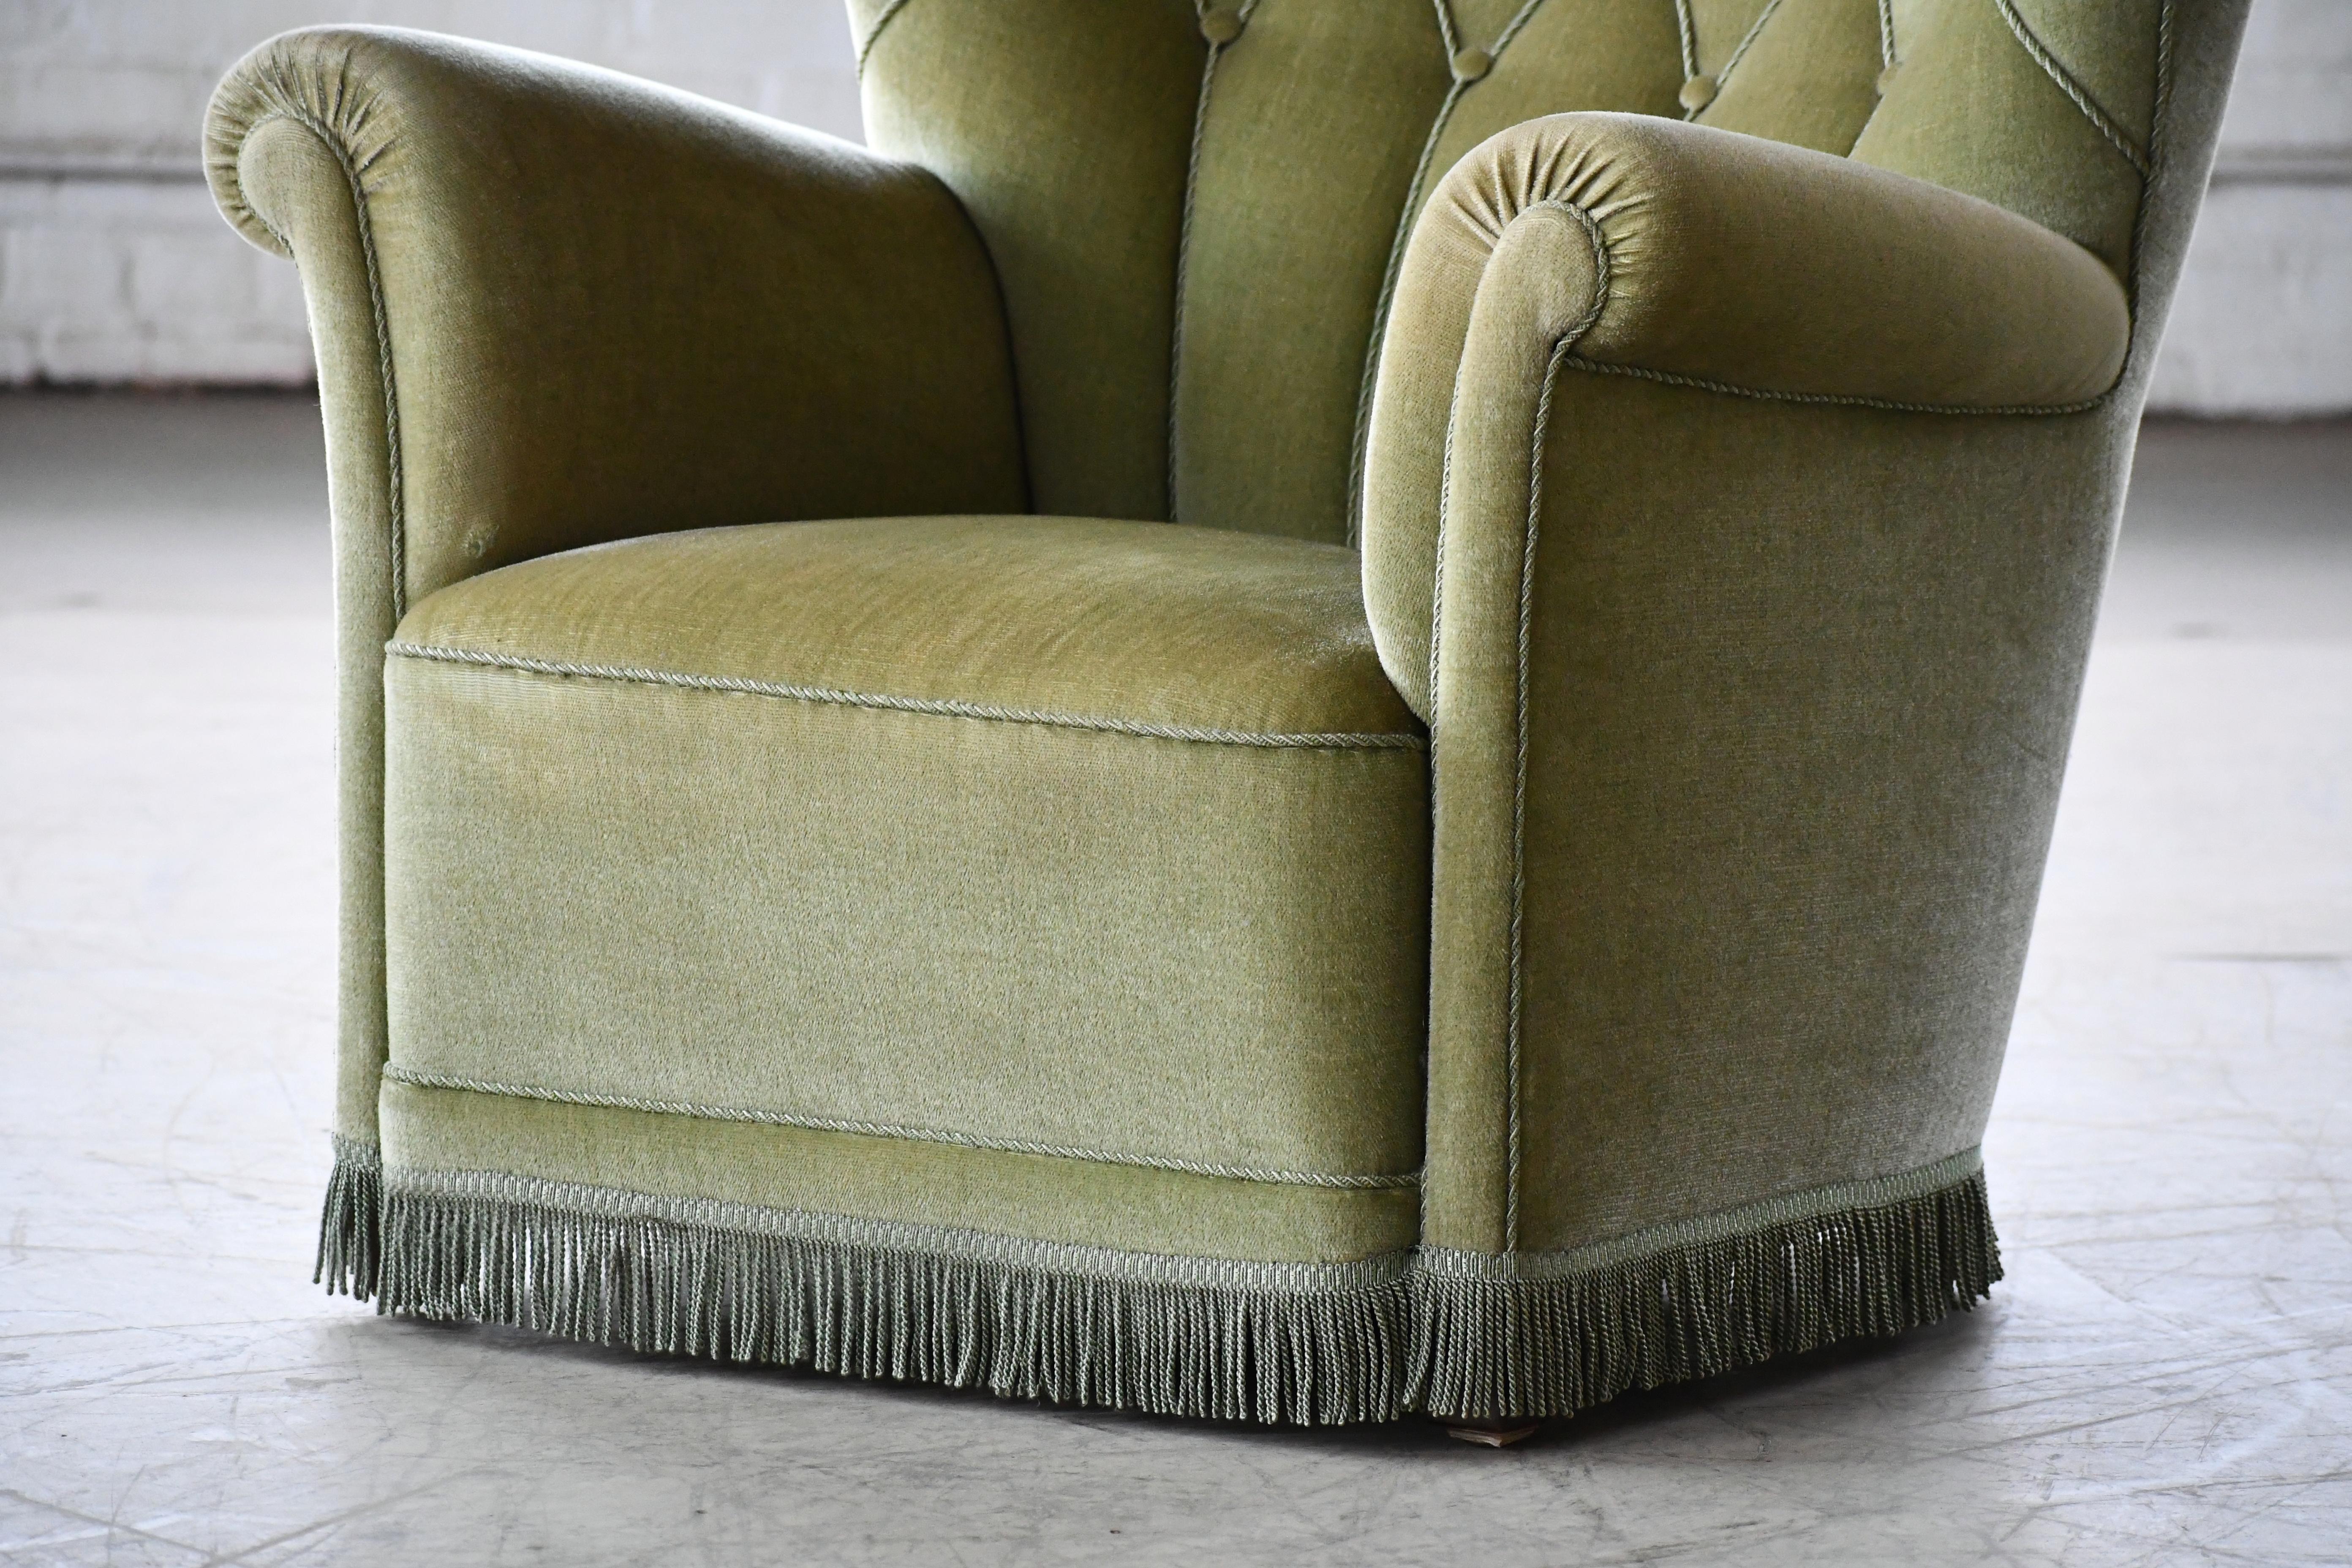 Beech Danish Mid-Century Lounge or Club Chair in Green Mohair, 1940's For Sale